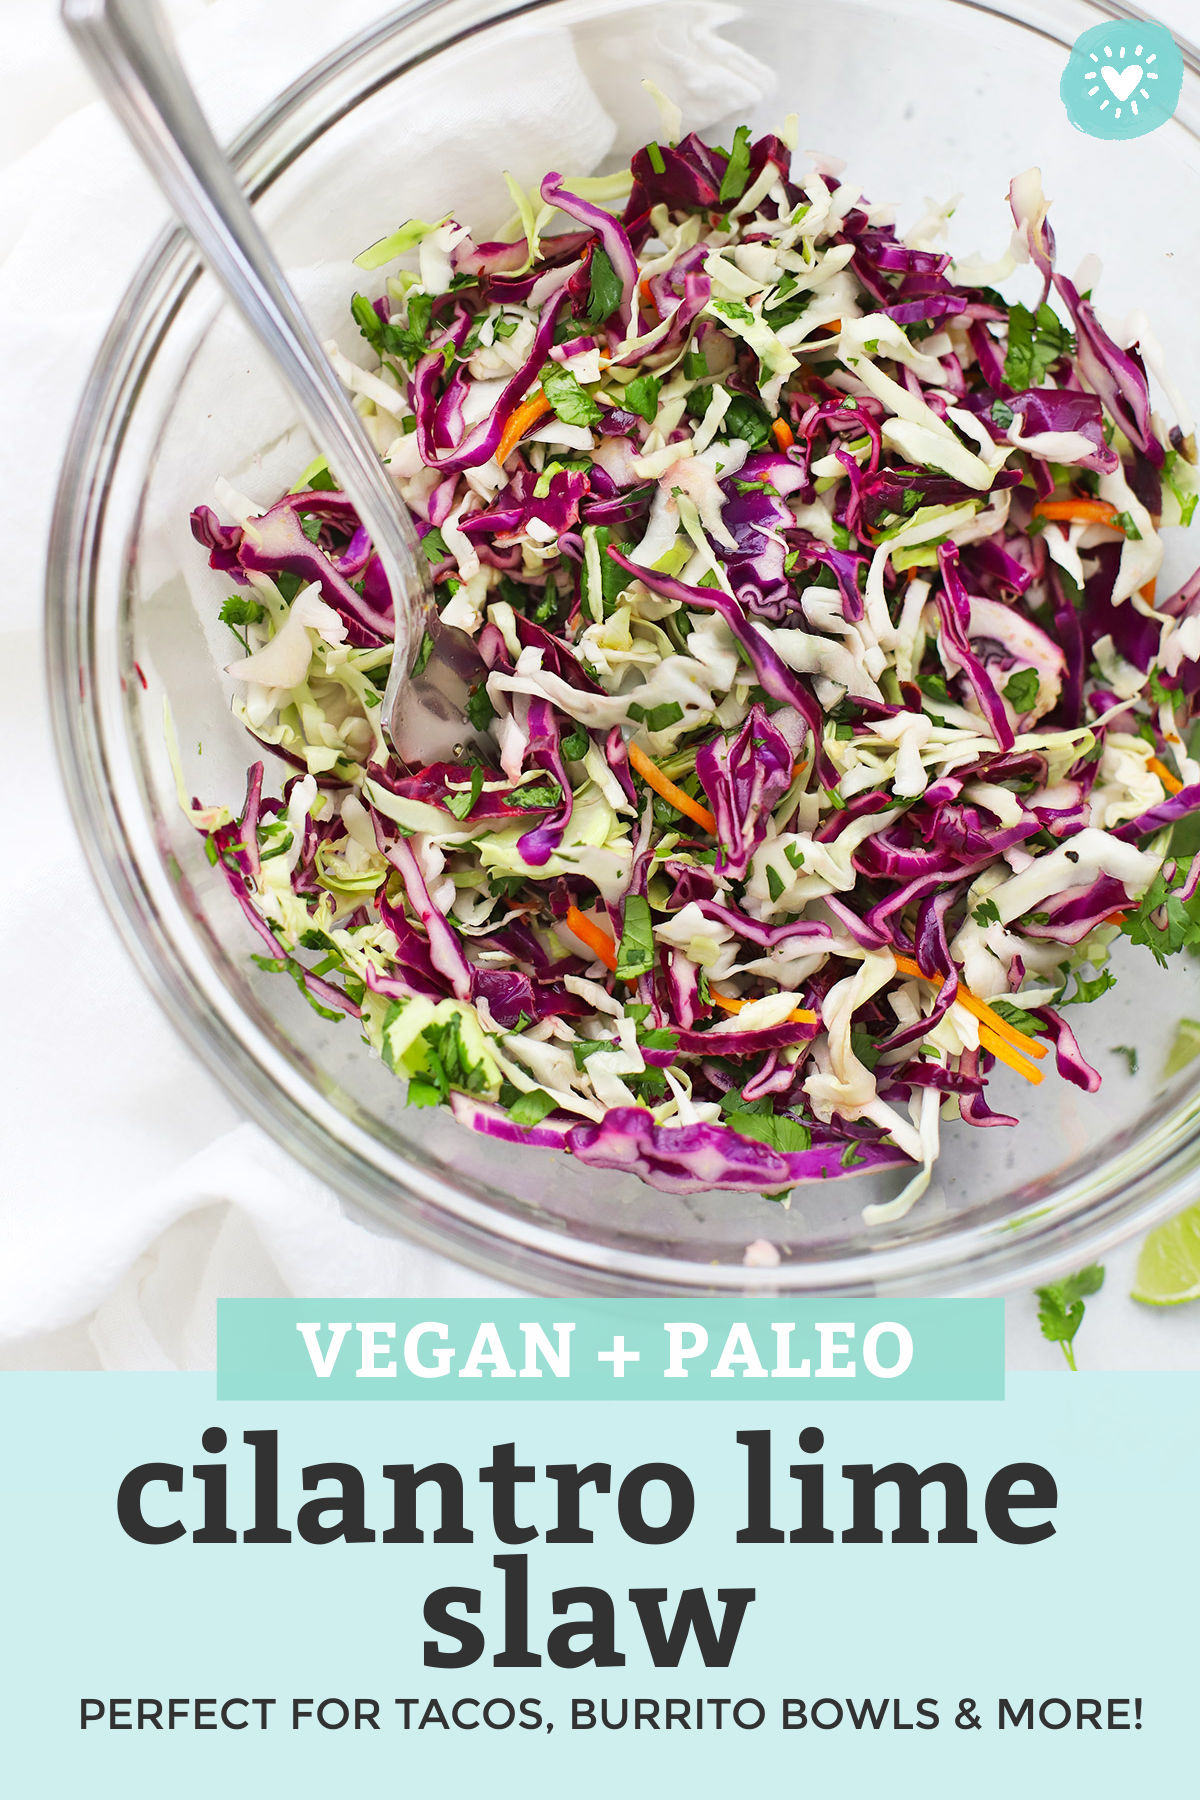 Close-up view of Cilantro Lime Slaw in a glass bowl with text overlay that reads "Vegan + Paleo Cilantro Lime Slaw. Perfect for tacos, burrito bowls, and more!"